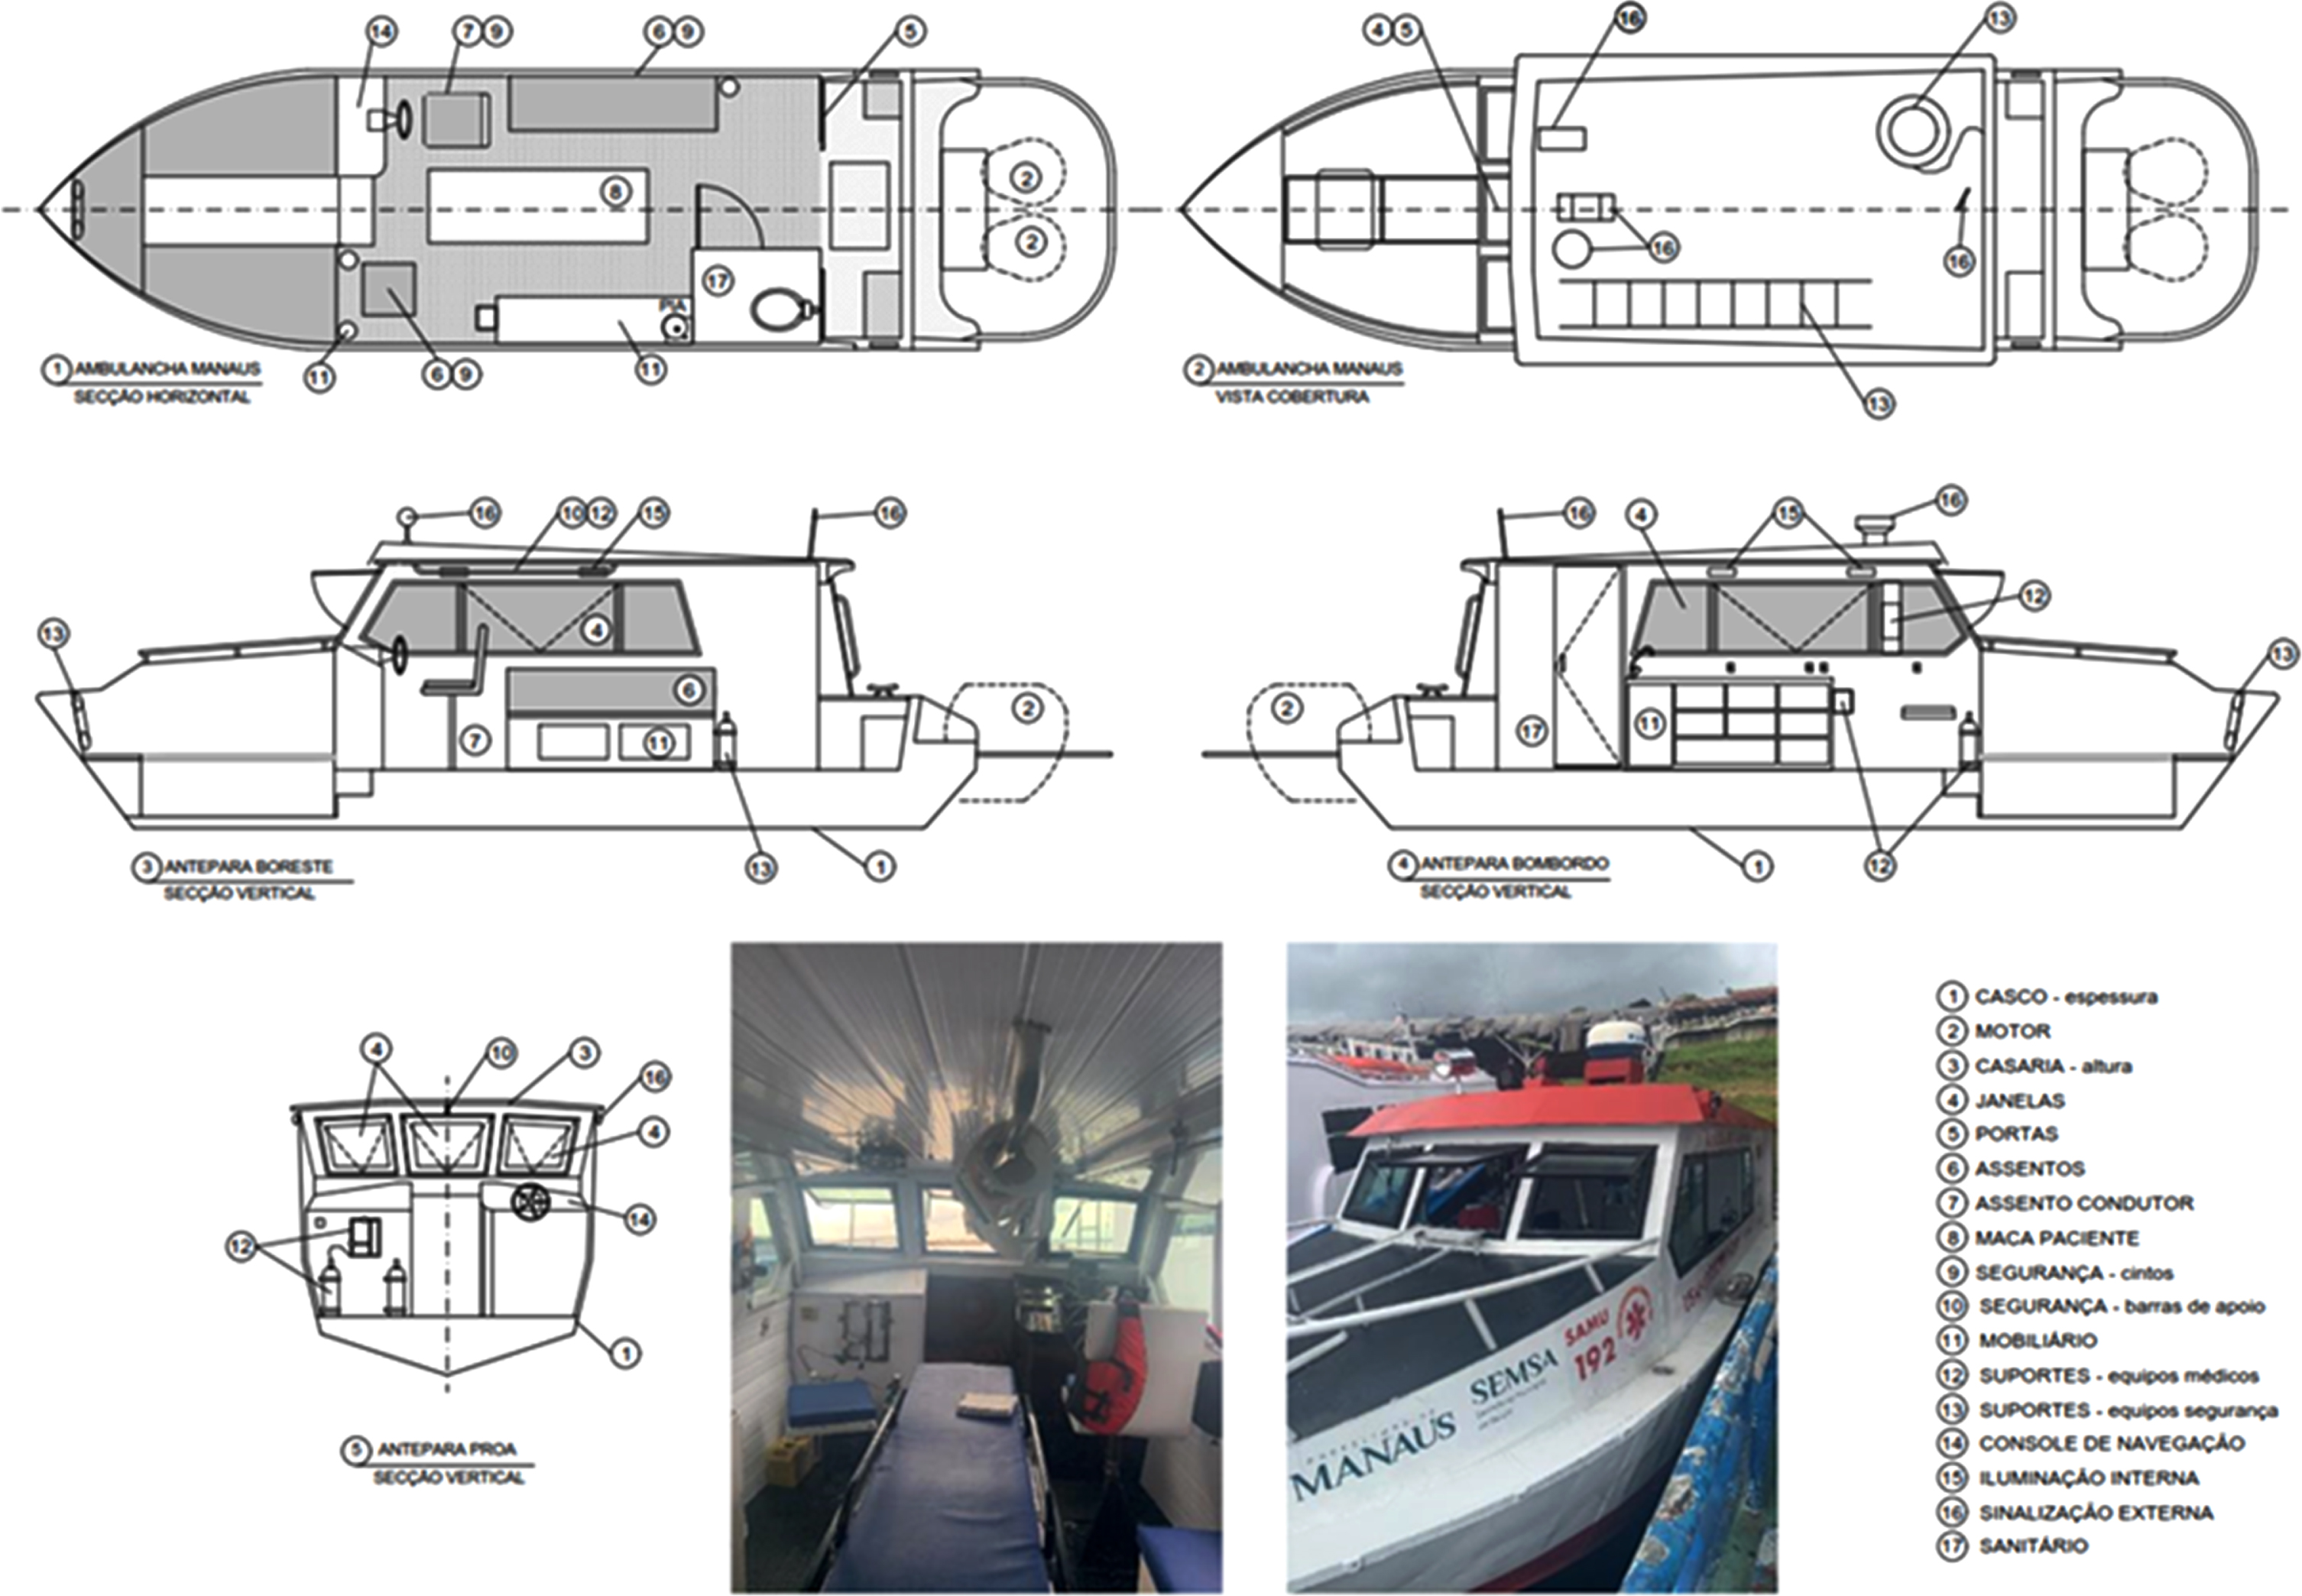 Technical drawing of the main water ambulance from the regional coordination of Manaus, Amazonas state.